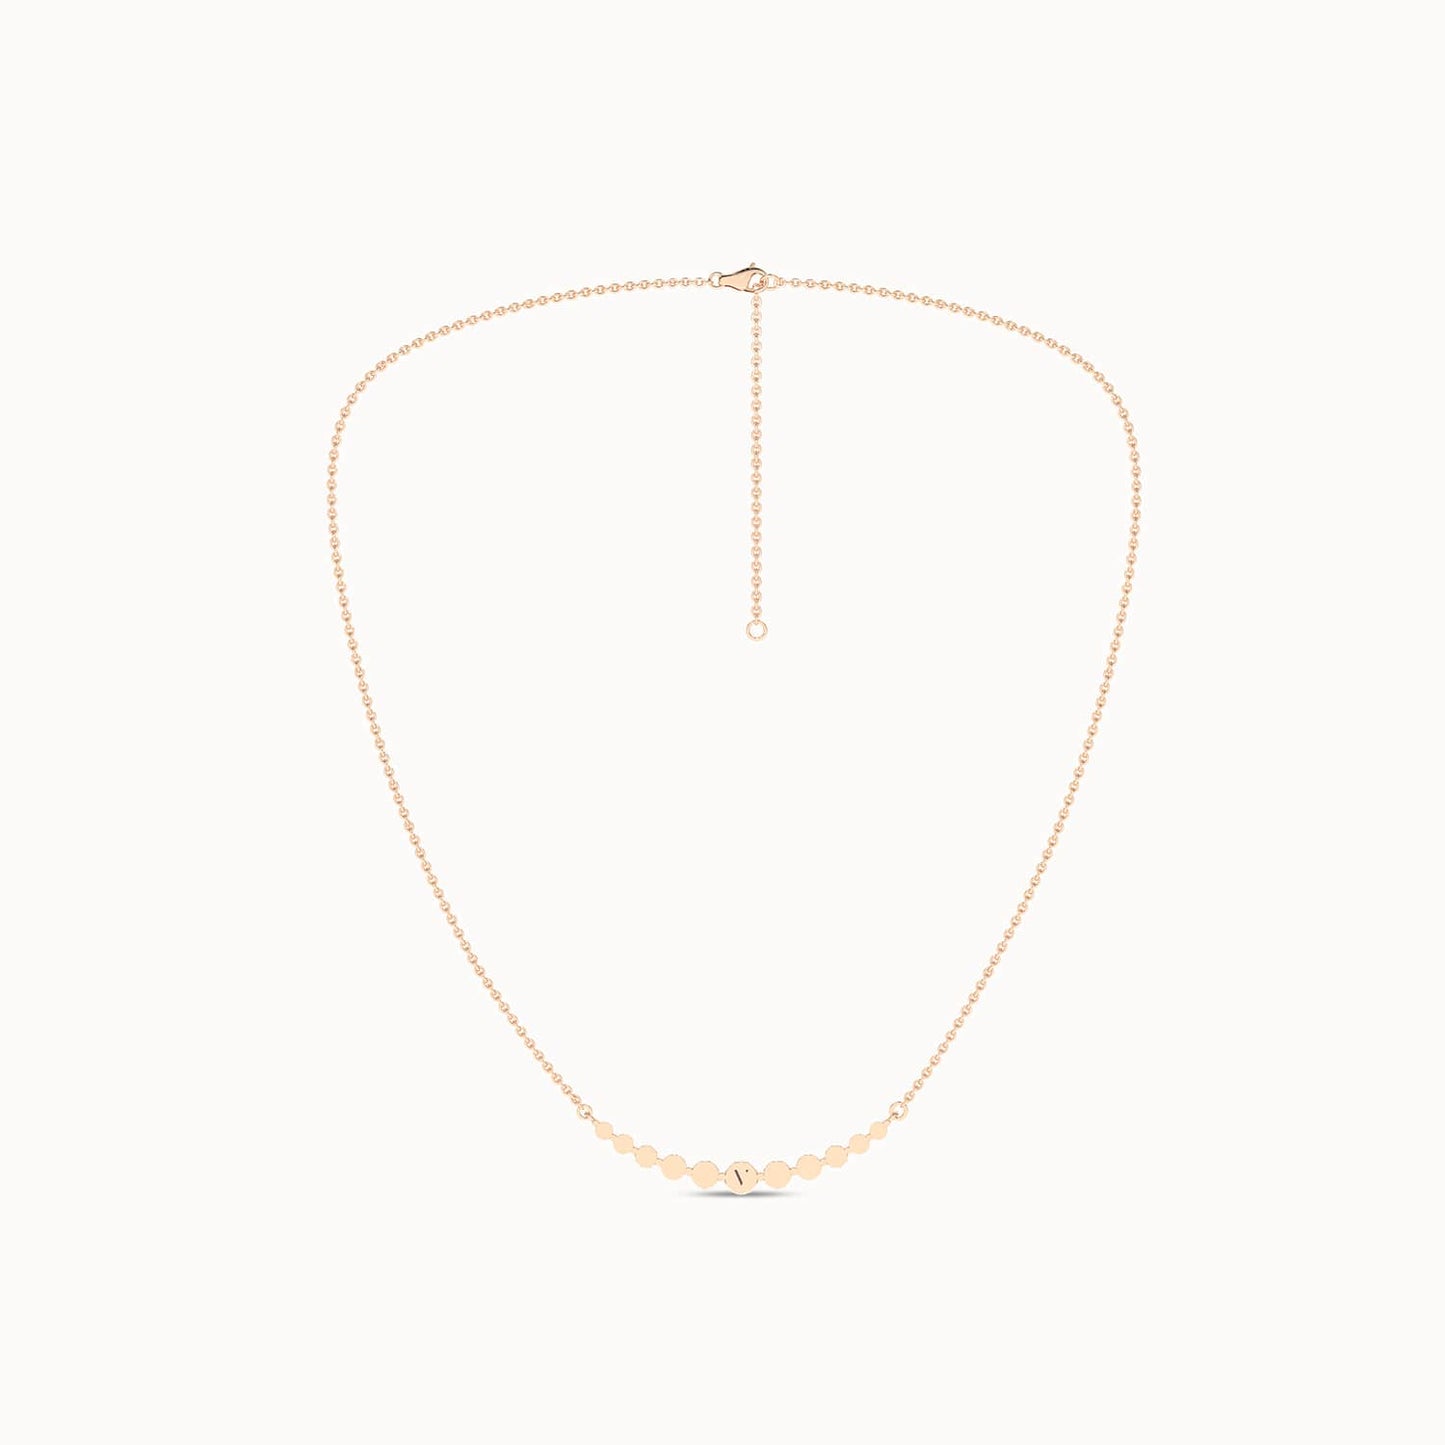 Captivating Necklace_Product Angle_1/2Ct. - 4